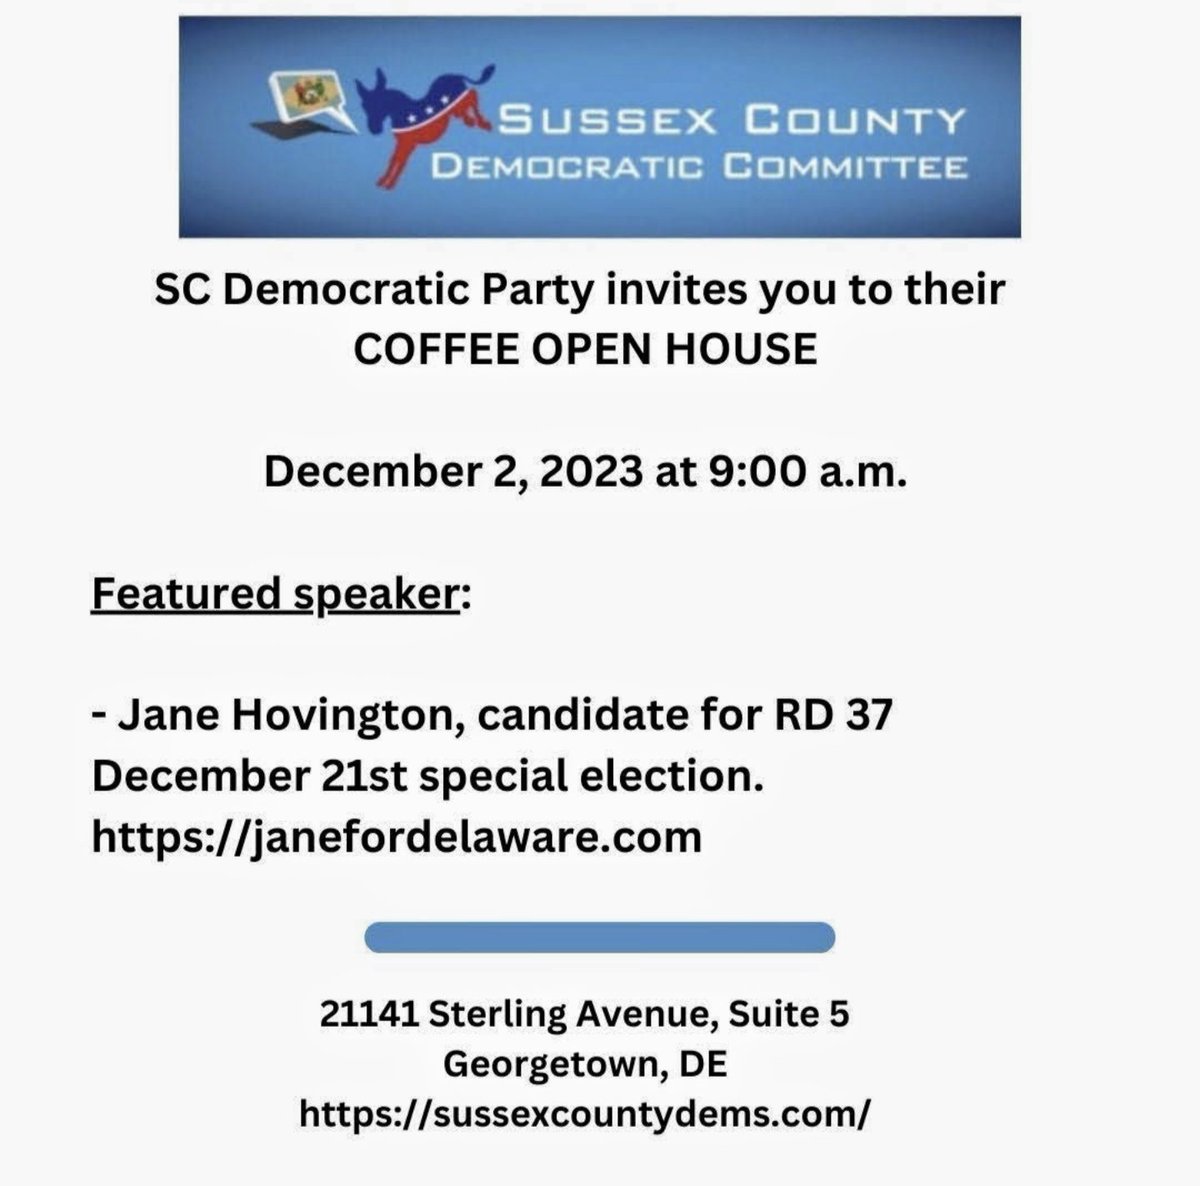 This Saturday morning. Jane Hovington candidate for RD 37 Special Election December 21
#netde @CapeGazette  @DelSussex @delawareonline @CityofRehoboth #georgetownde @sussexde_govt